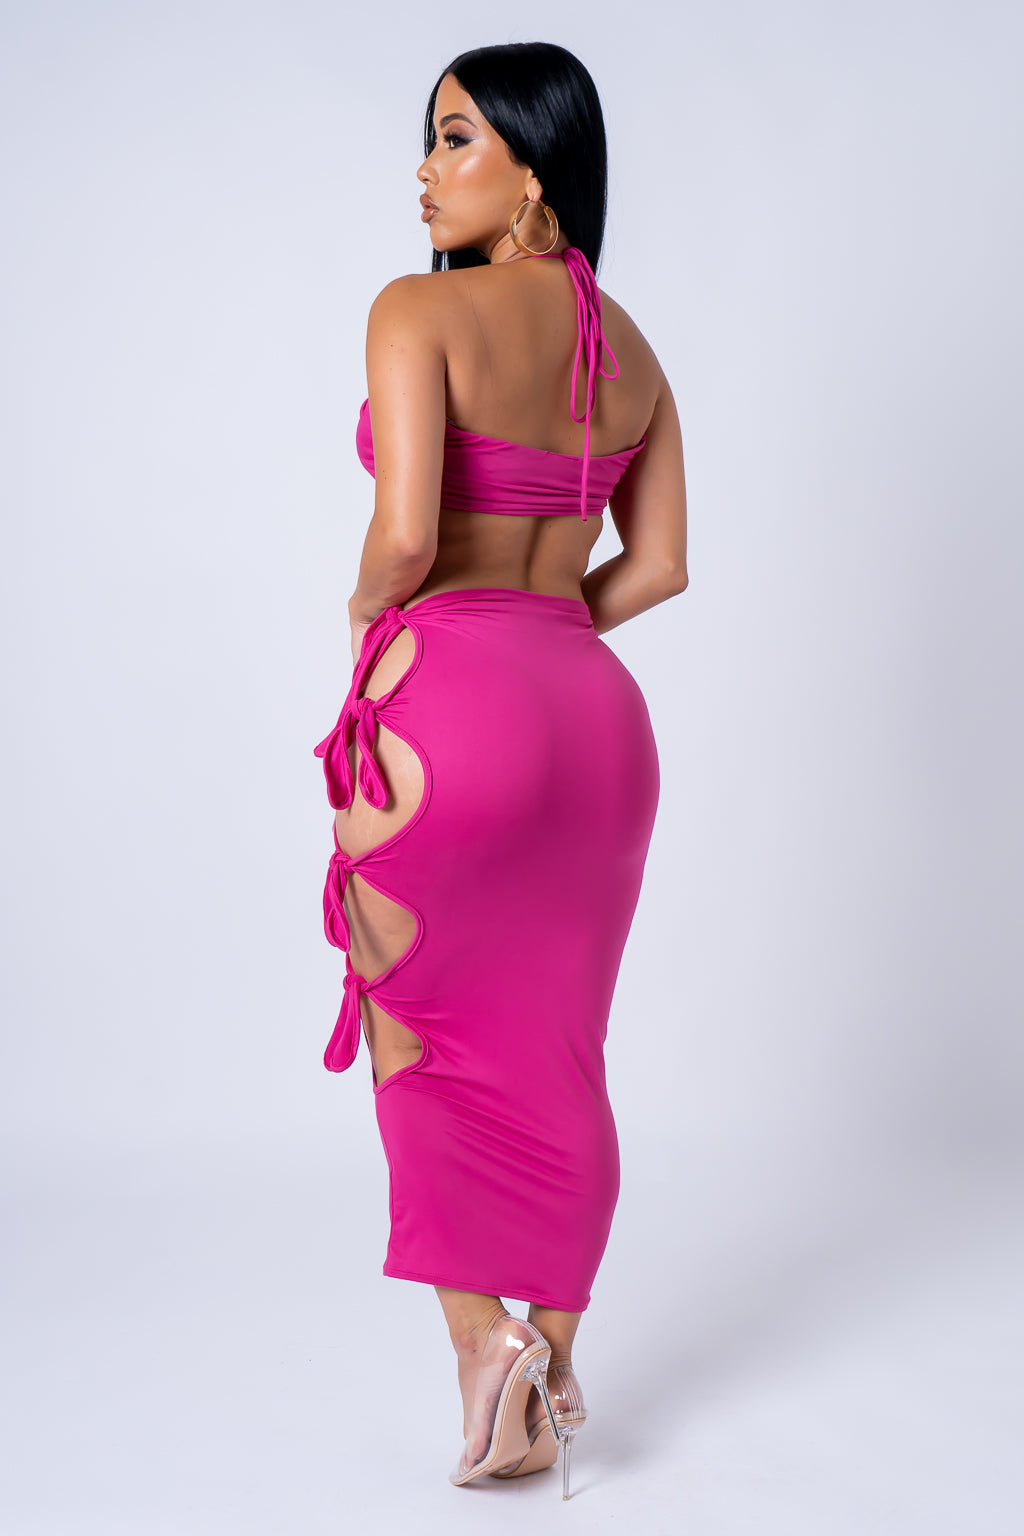 Don't Worry About It Two Piece Skirt Set - Fuchsia